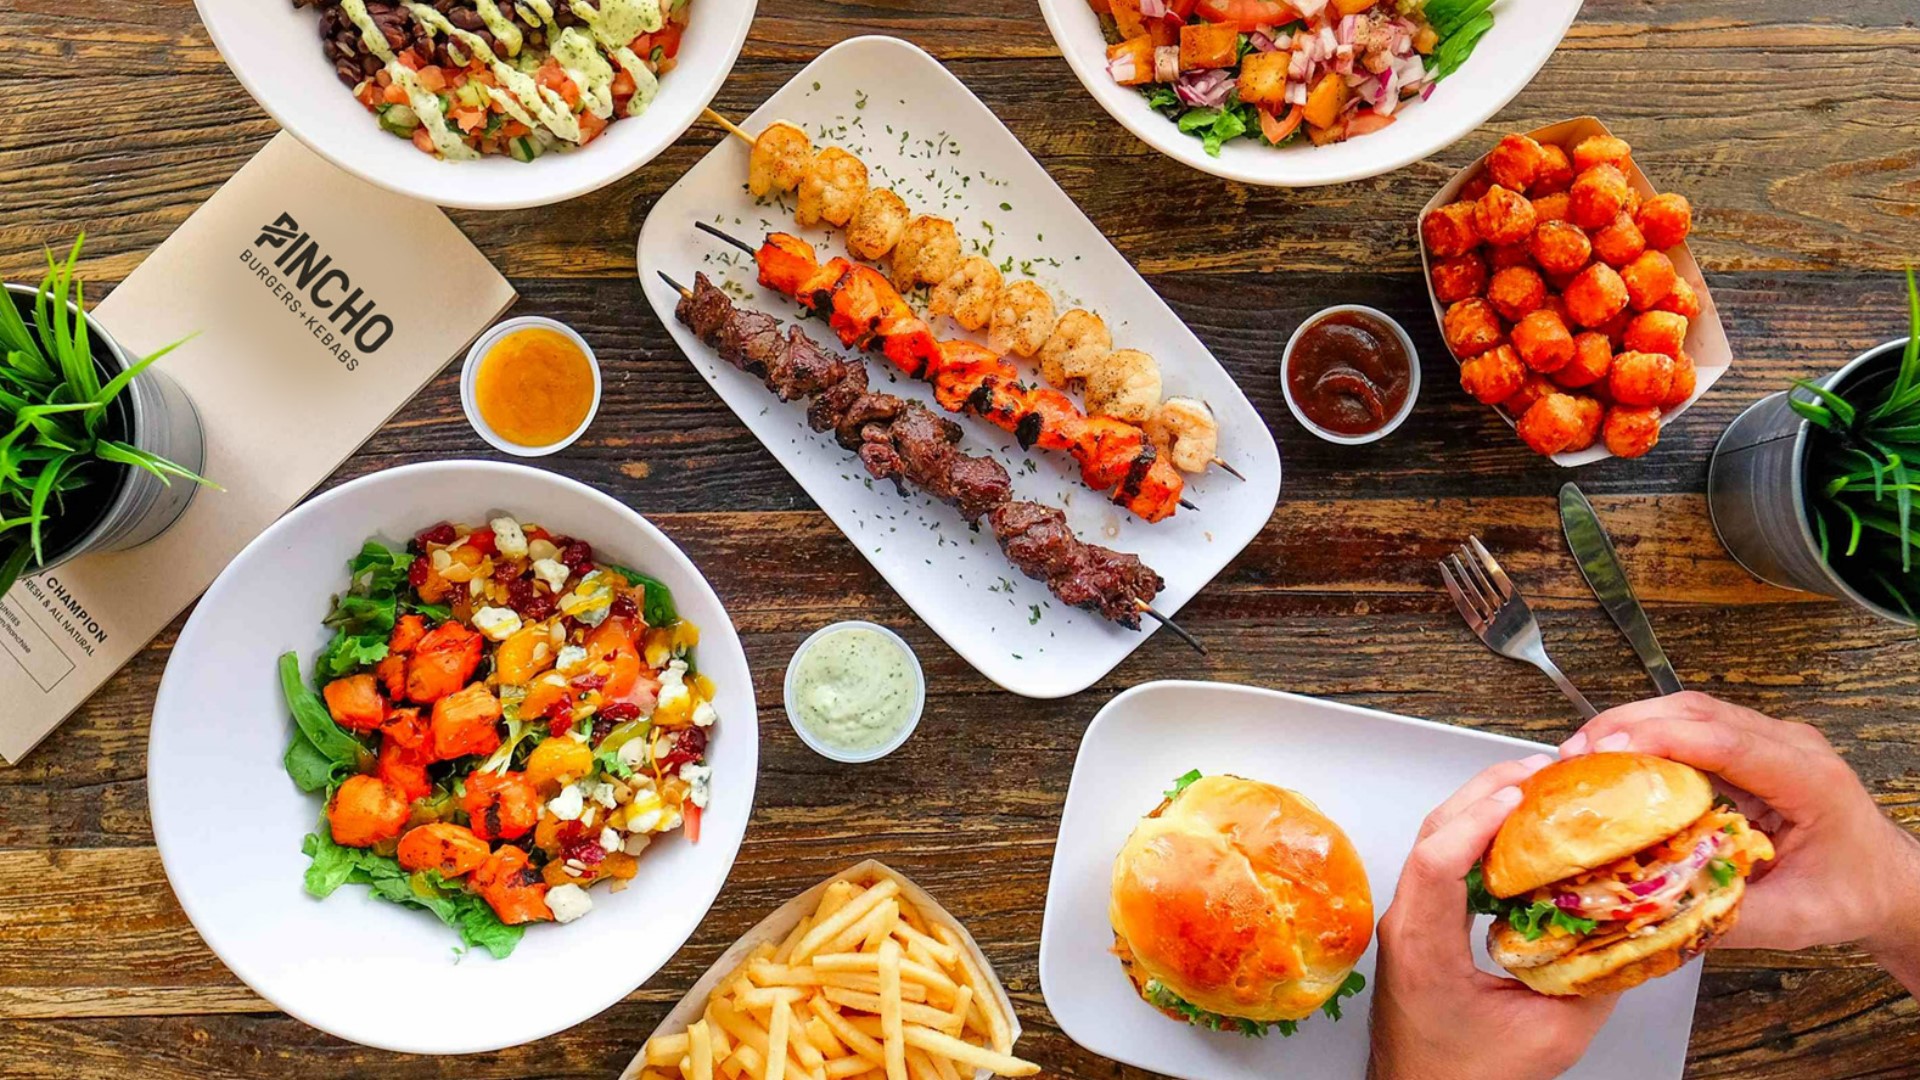 The Latin-inspired burger and kebab restaurant chain is set to open its first location out of South Florida in late June.